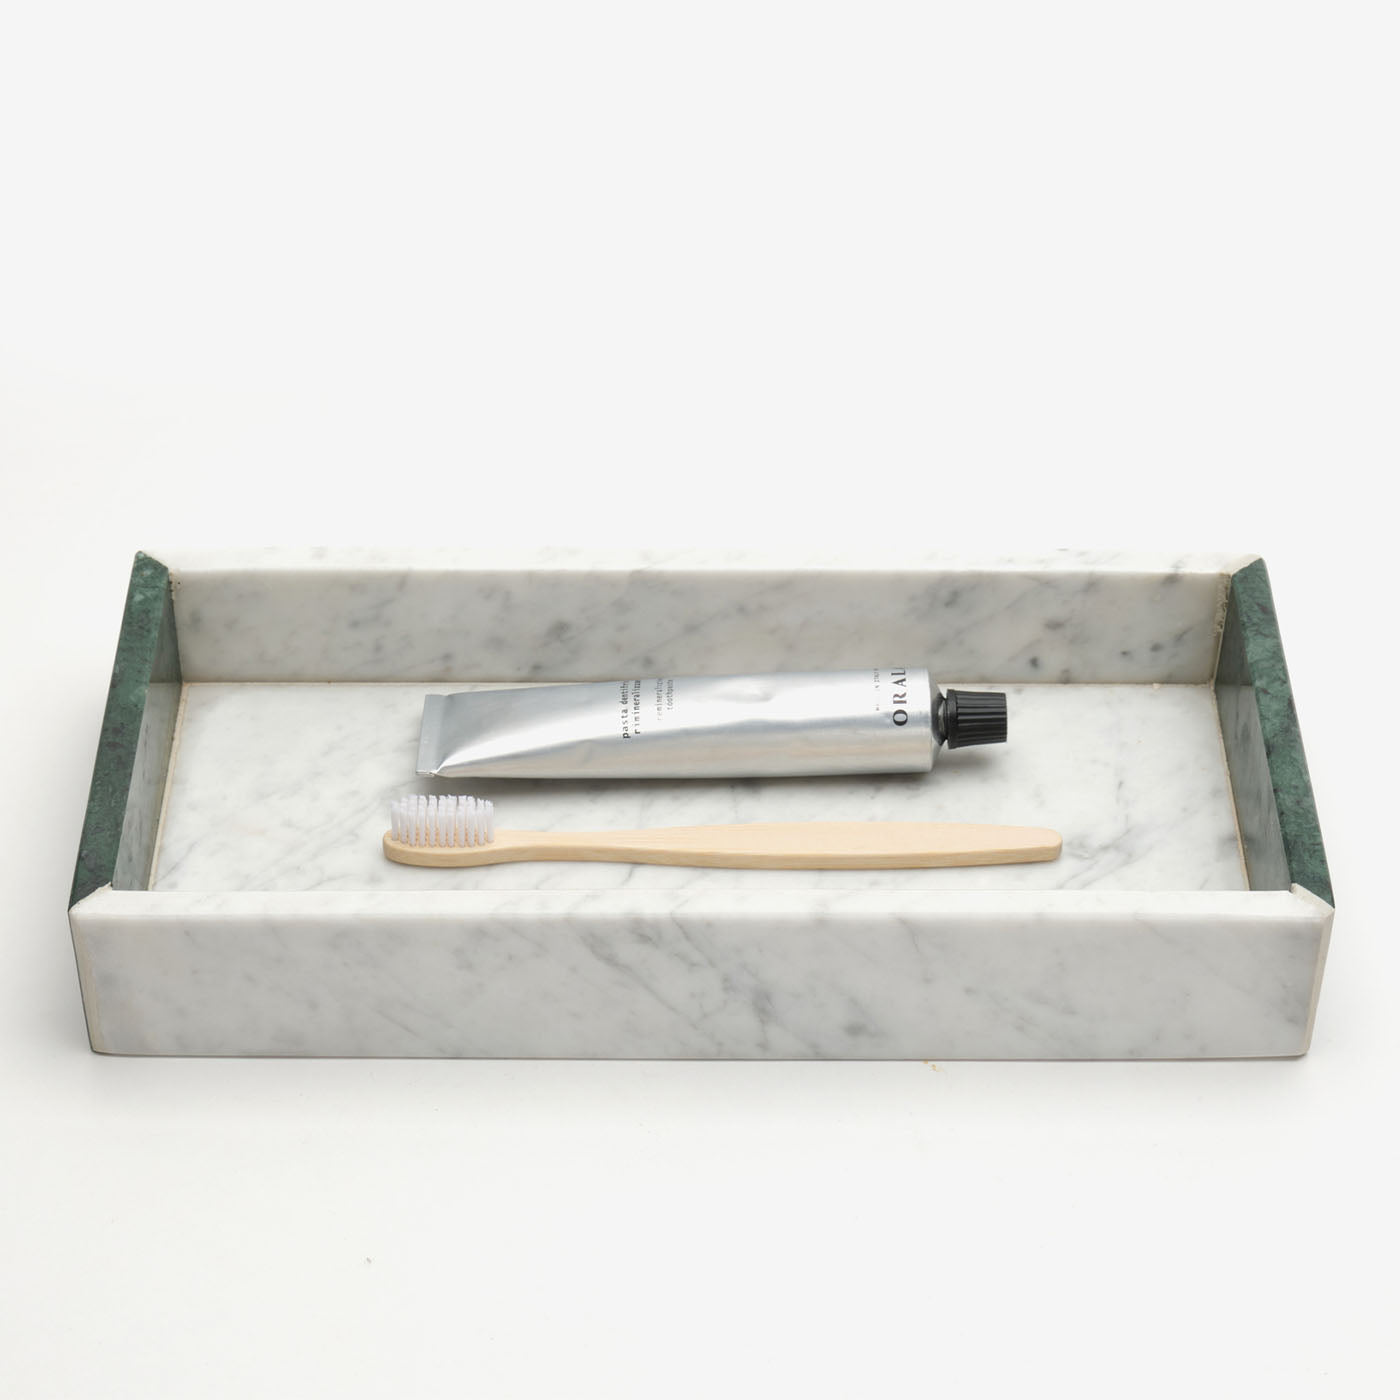 Carrara Marble and Green Marble Tray #1 - Alternative view 1